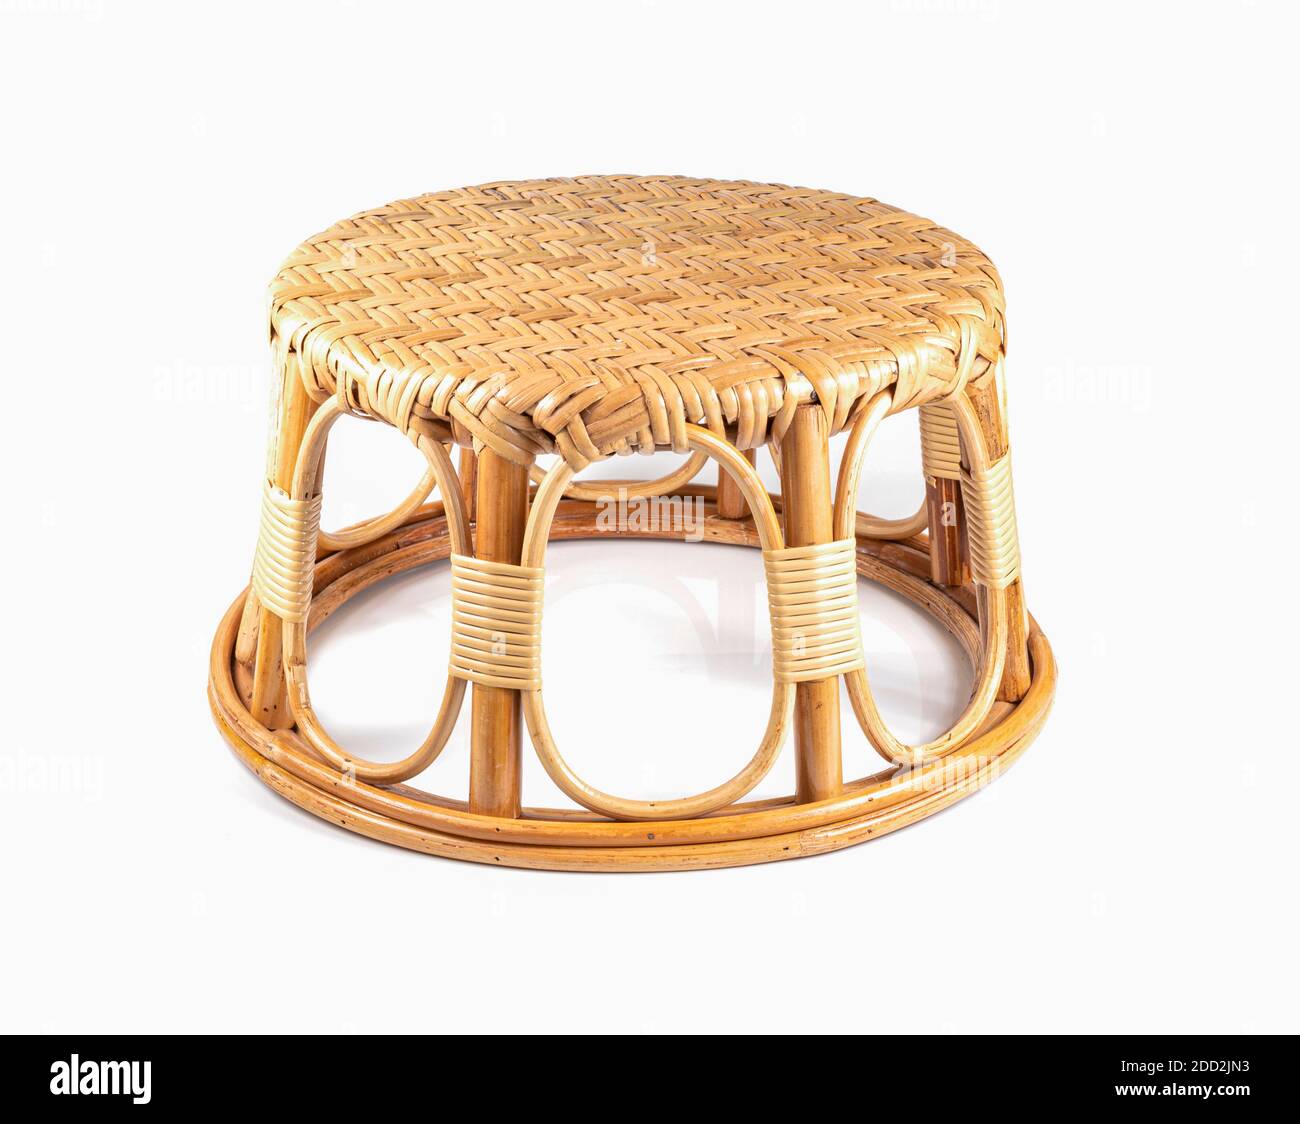 Wicker stool made from rattan and bamboo on white Stock Photo